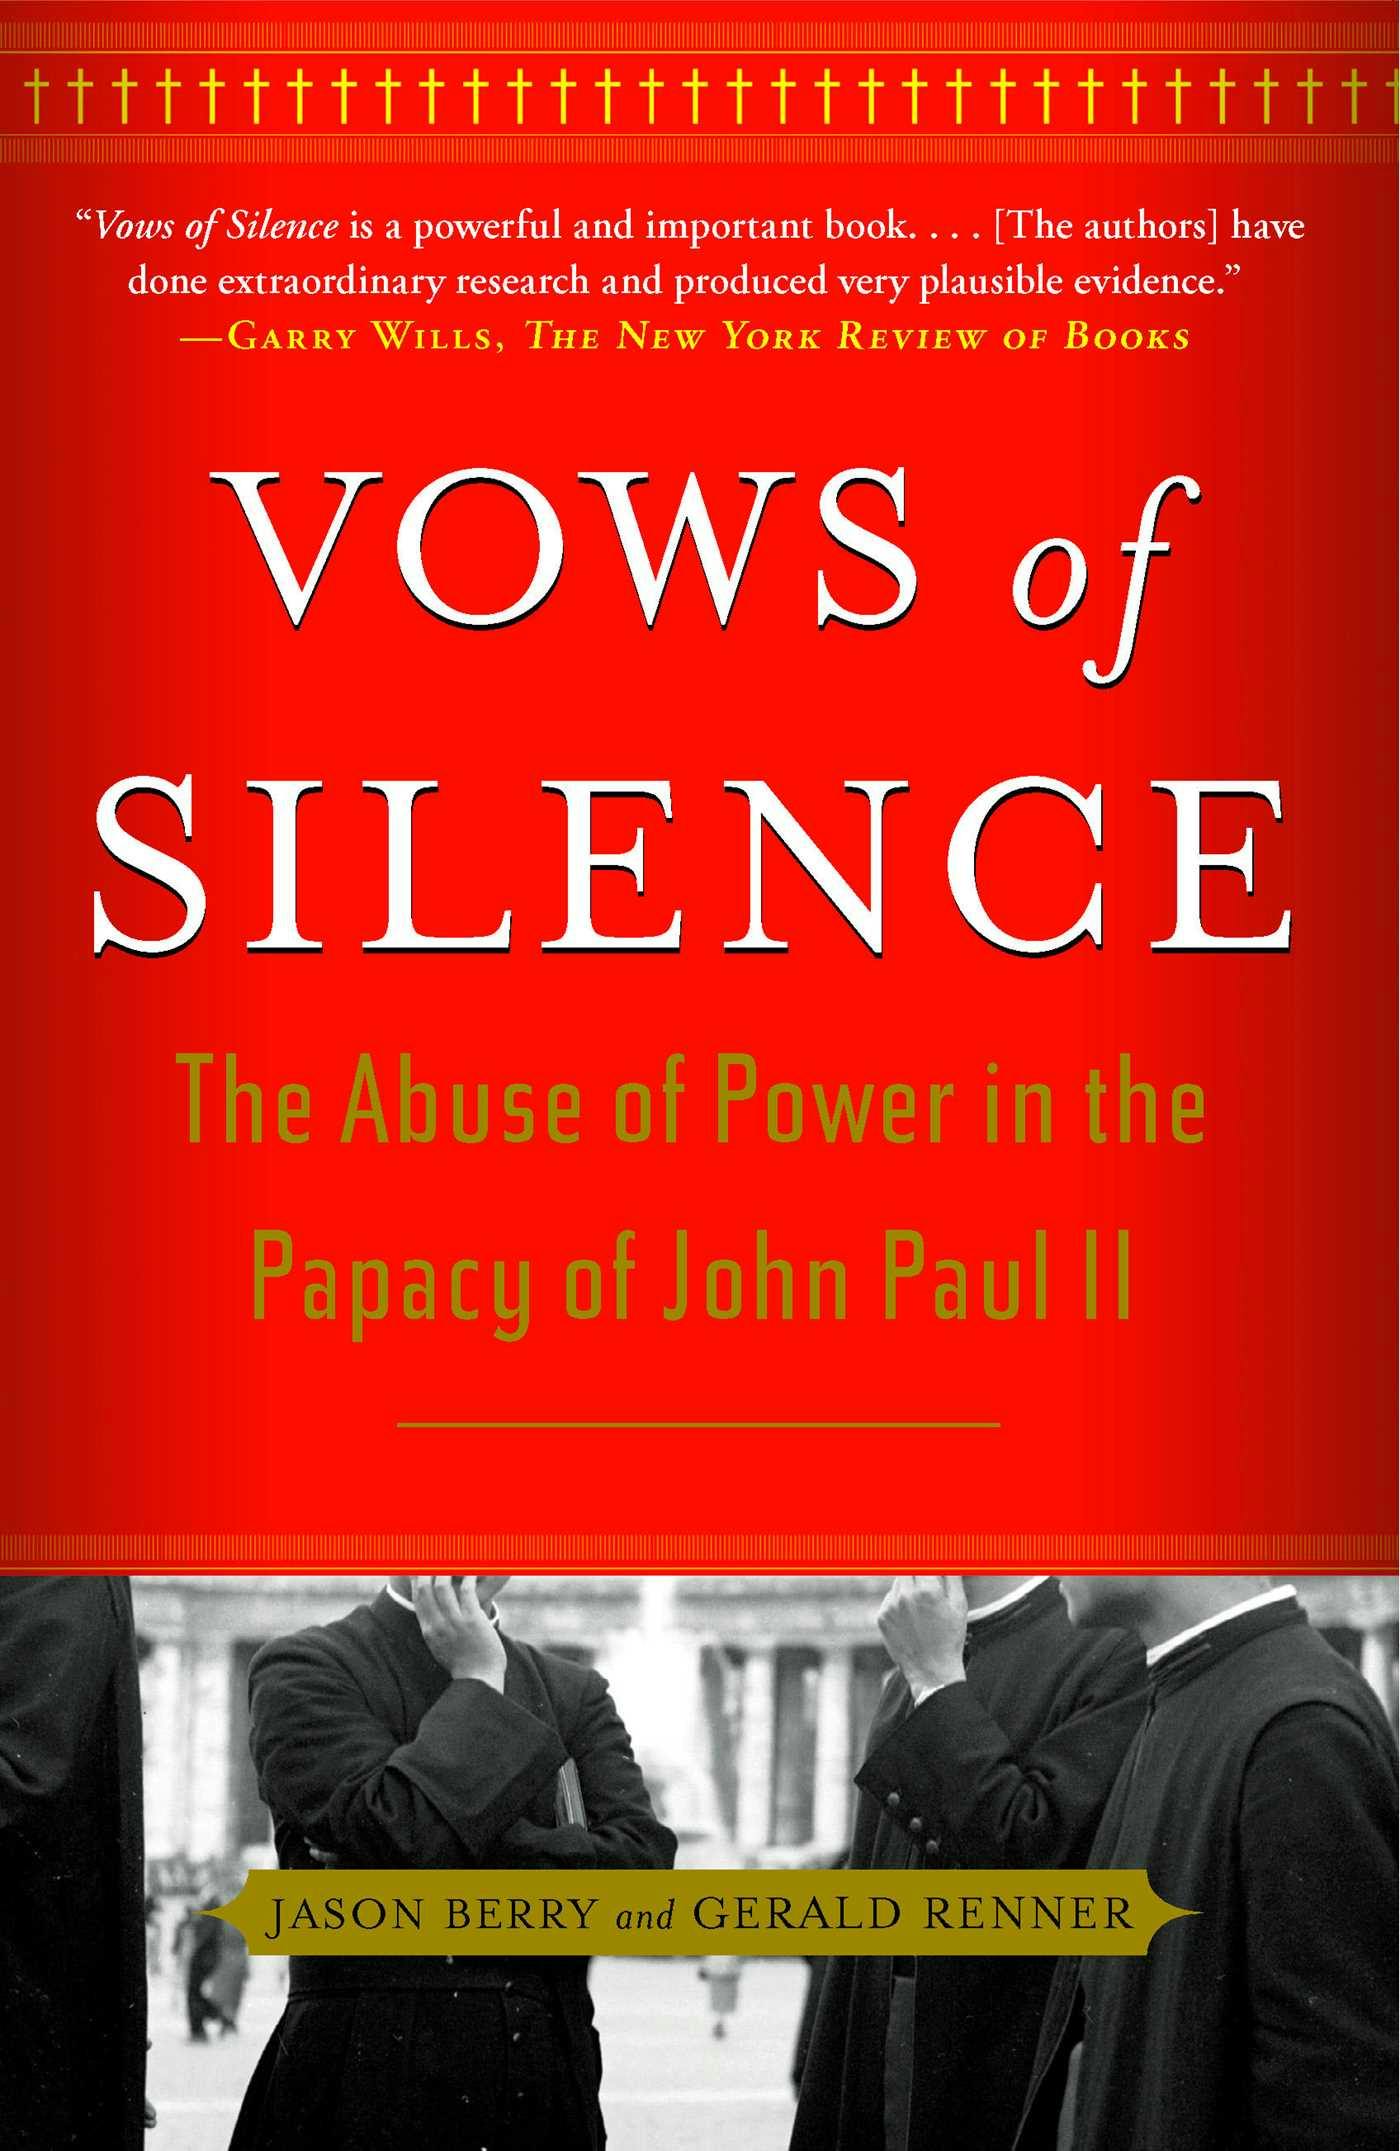 Vows of Silence: The Abuse of Power in the Papacy of John Paul II - Jason Berry, Gerald Renner